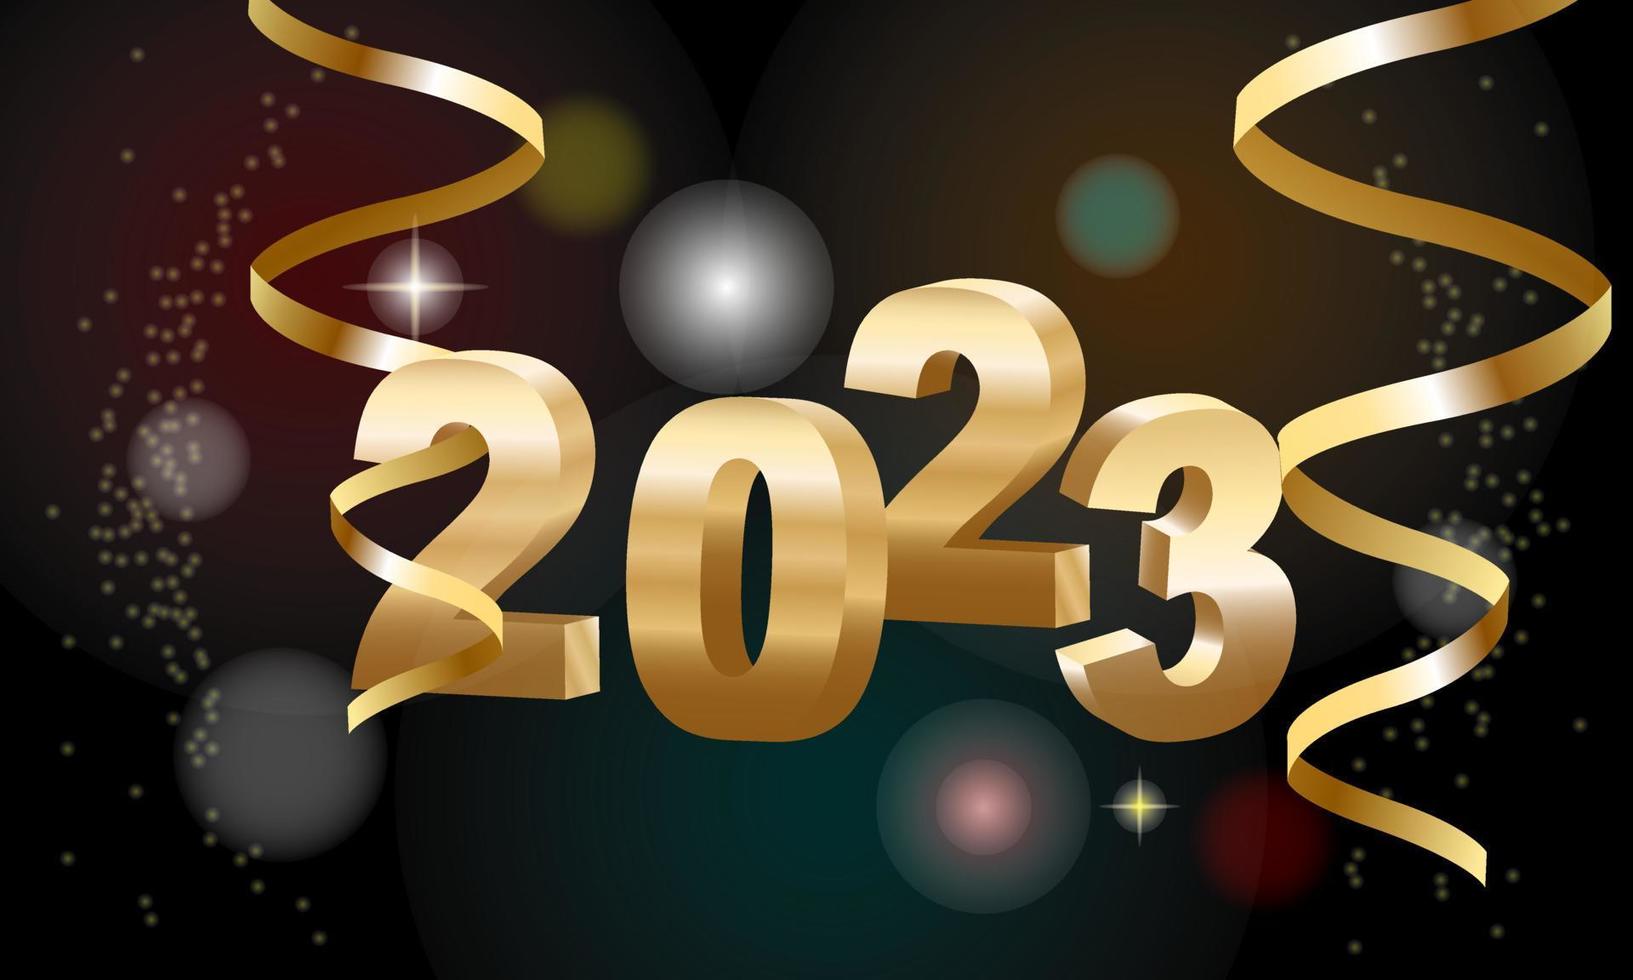 Happy New Year 2023 Hanging Golden 3d Numbers With Ribbons And Confetti On A Defocused Colorful Bokeh Background Free Vector